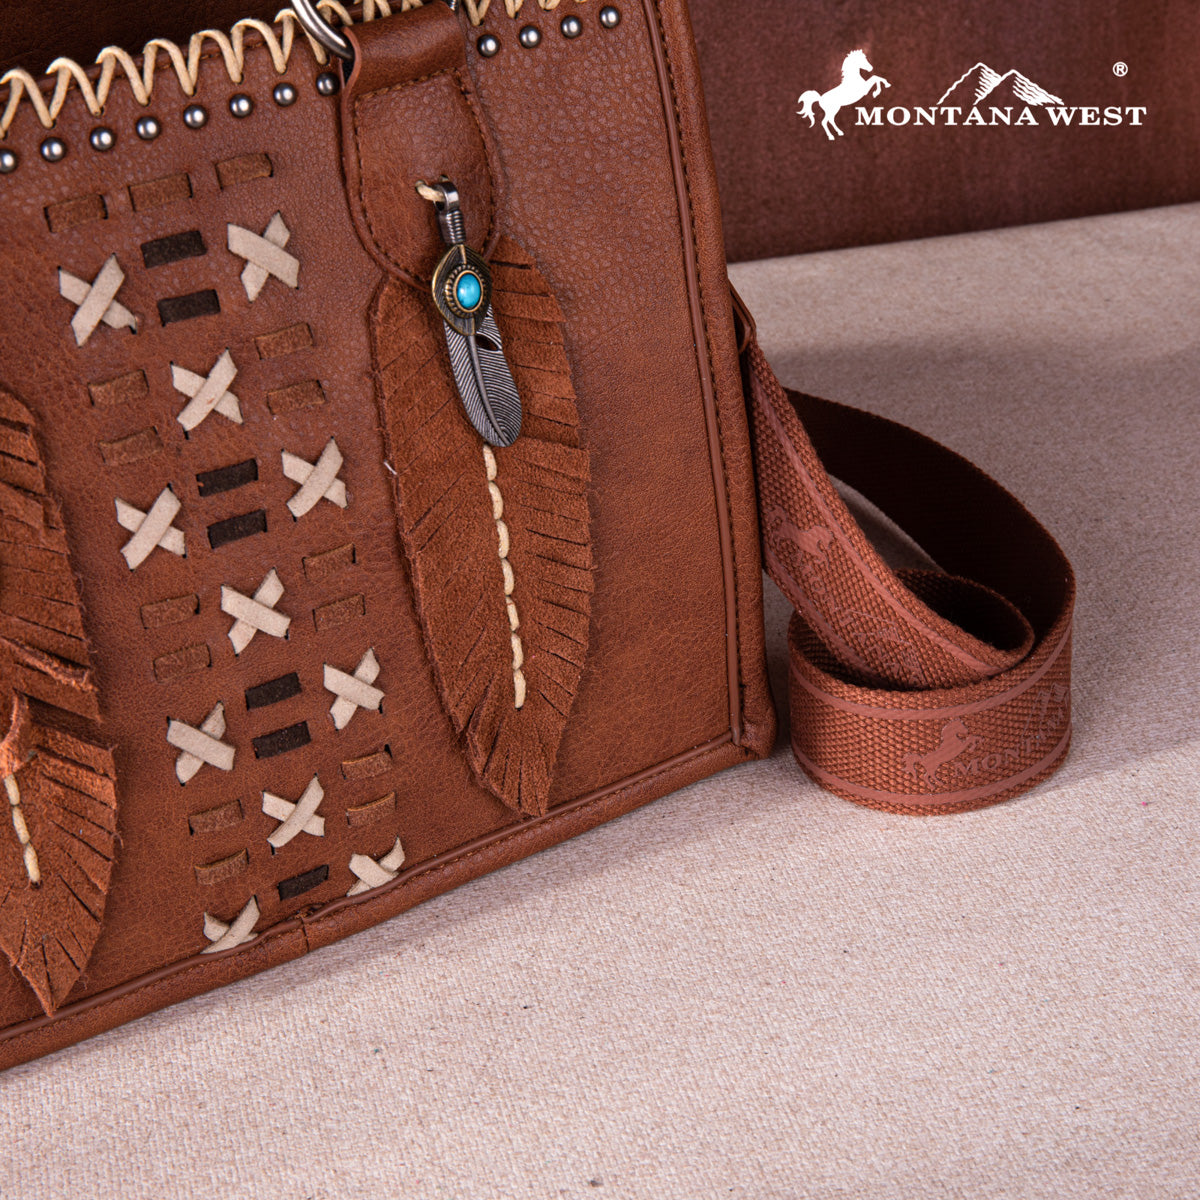 Montana West Whipstitch Feather Tote Bag